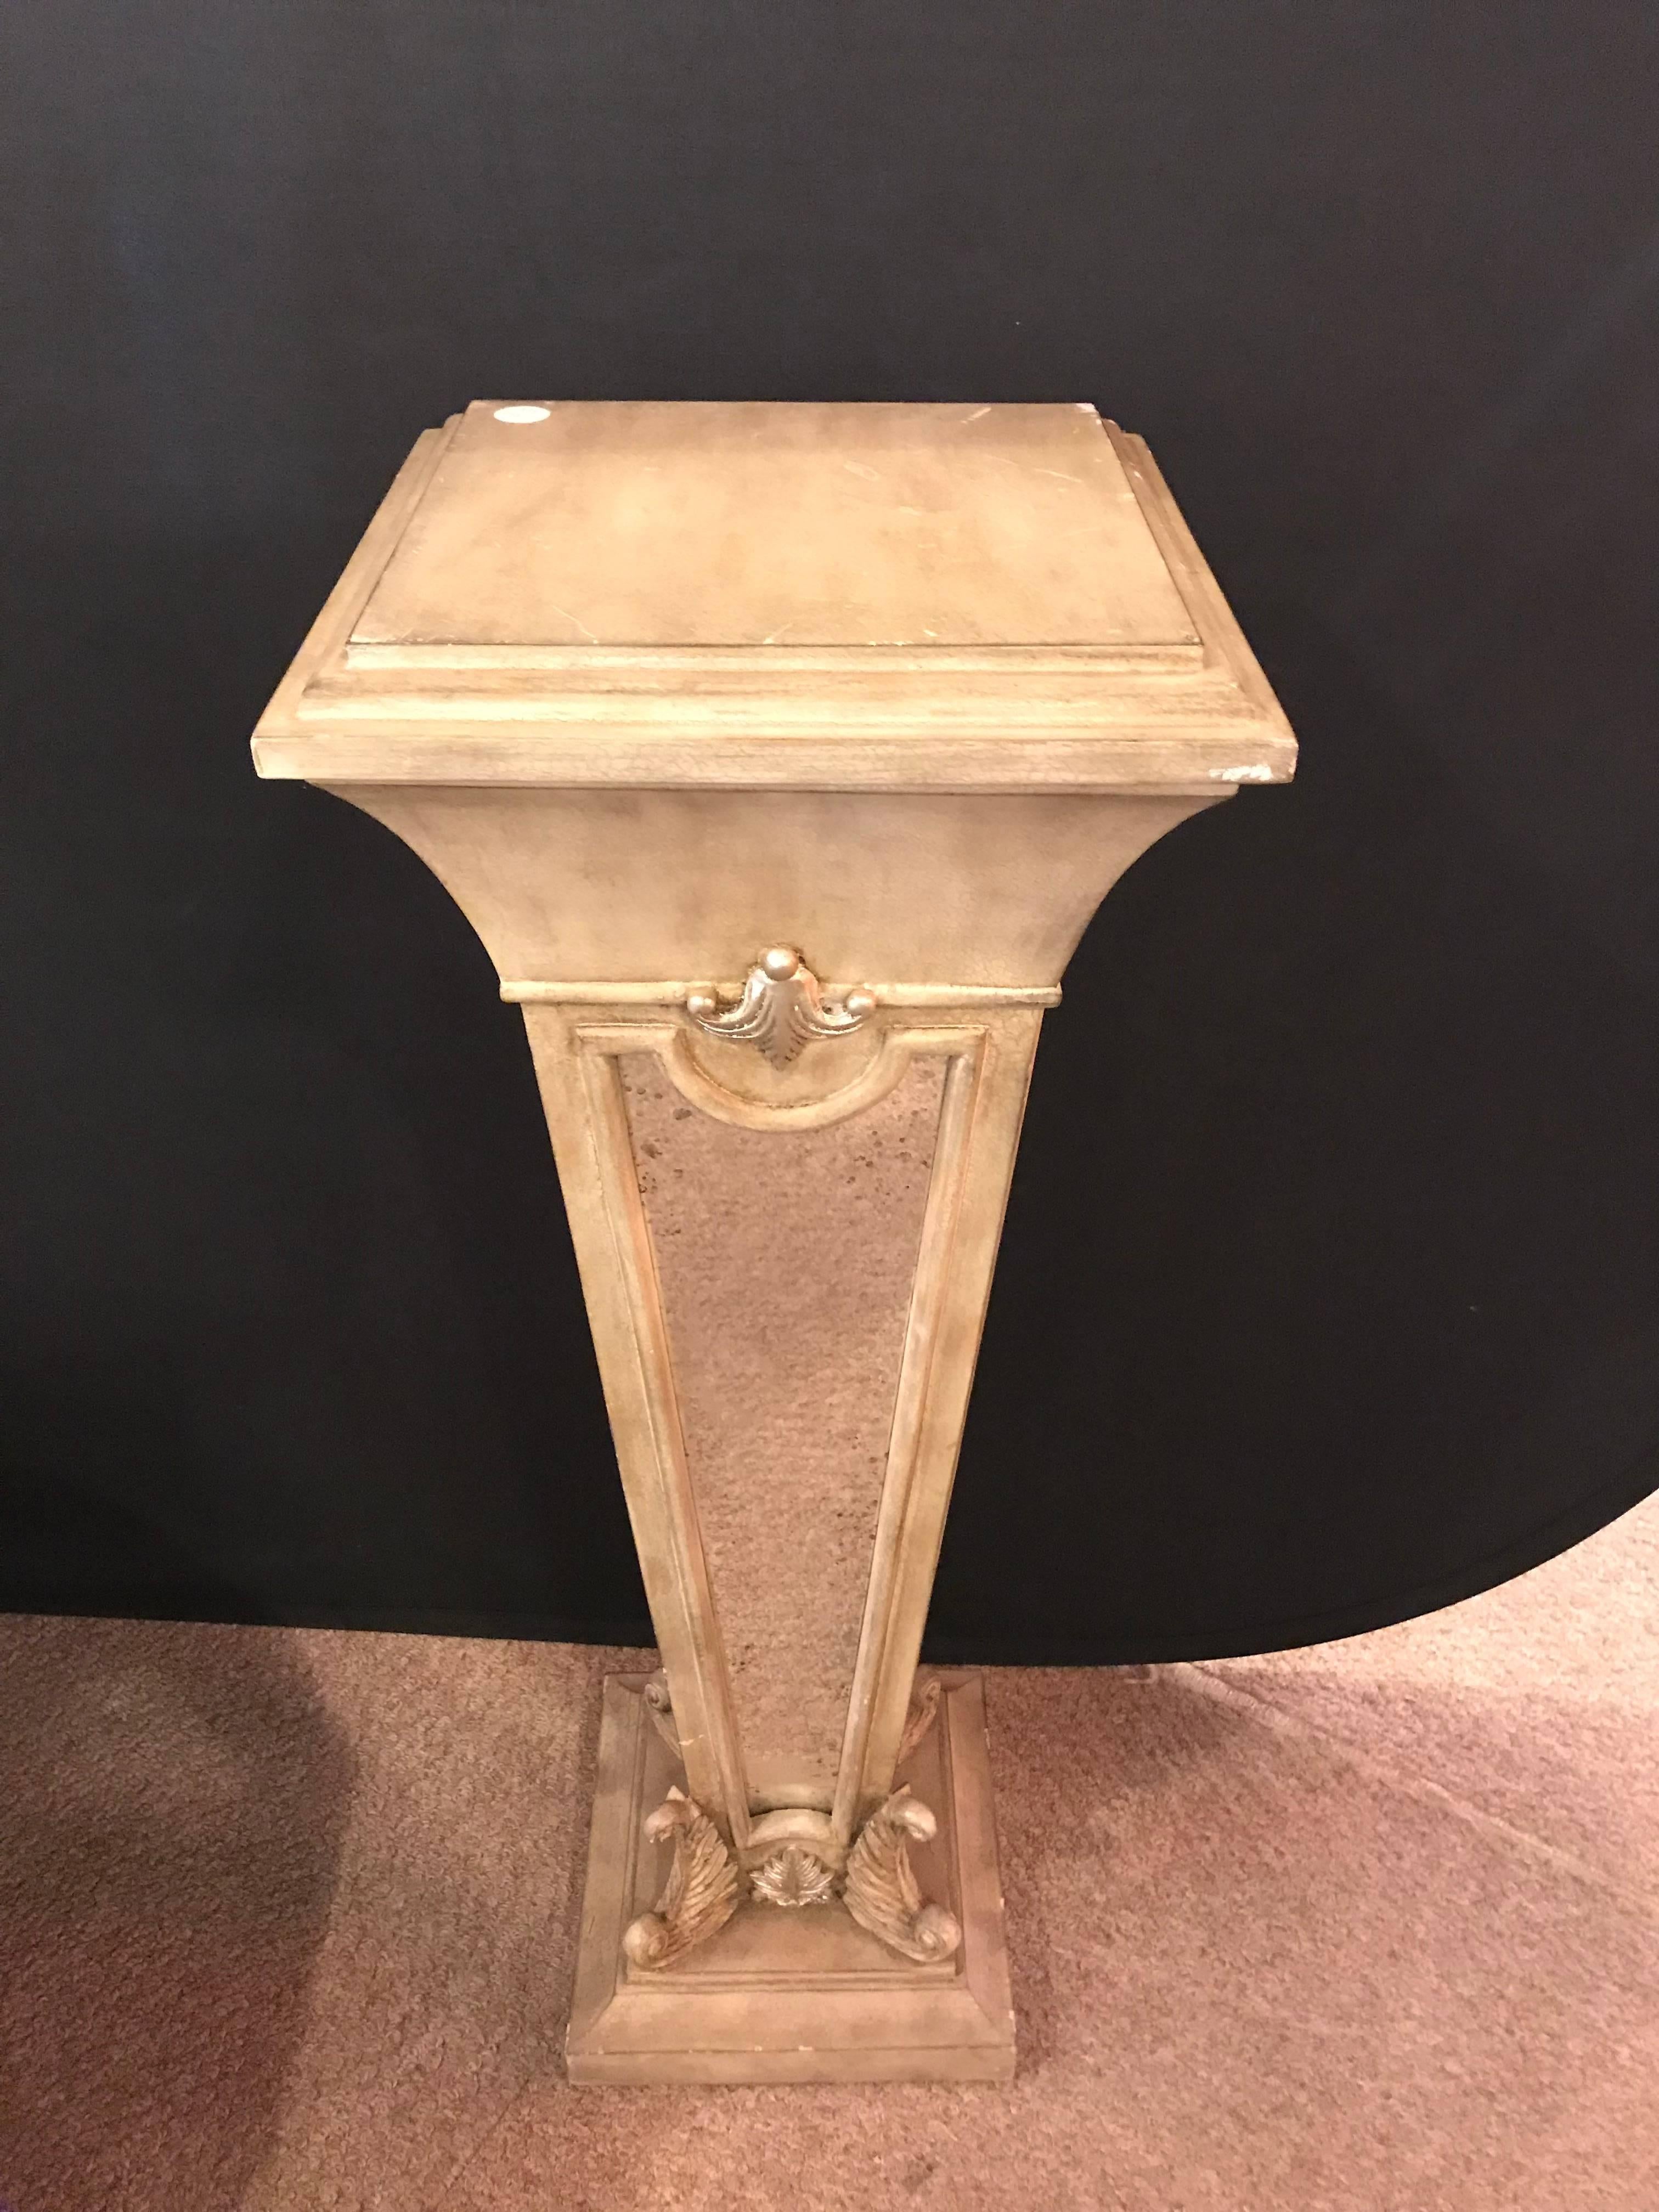 A Hollywood Regency style mirror and painted pedestal. This pedestal in square form with very nice carvings and mirrored side panels is a sure fire addition to any Art Deco or Hollywood Regency design setting.